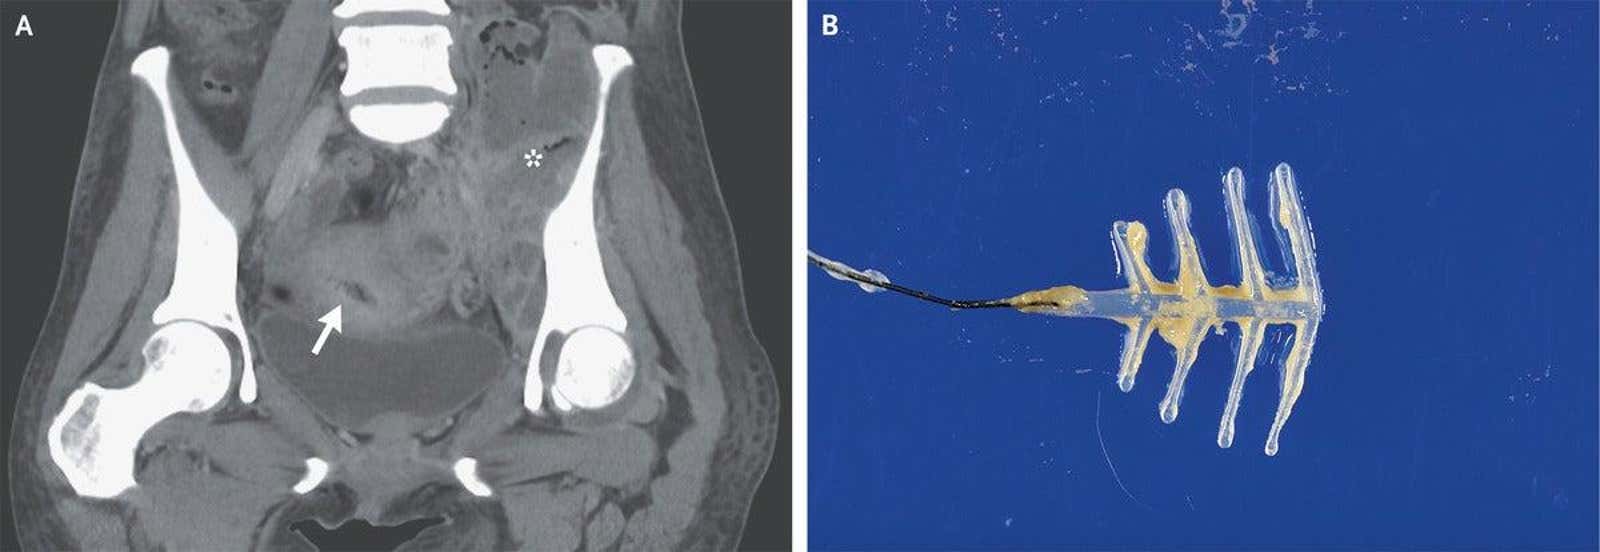 The left image is a CT scan taken of the patient, with the arrow pointing to her IUD and the asterisk denoting an nearby abscess. The right image is of the IUD after removal, with the yellow substance thought to be the bacteria that caused her infection. (Photo: Noriko Arakaki and Yusuke Oshiro/NEJM)